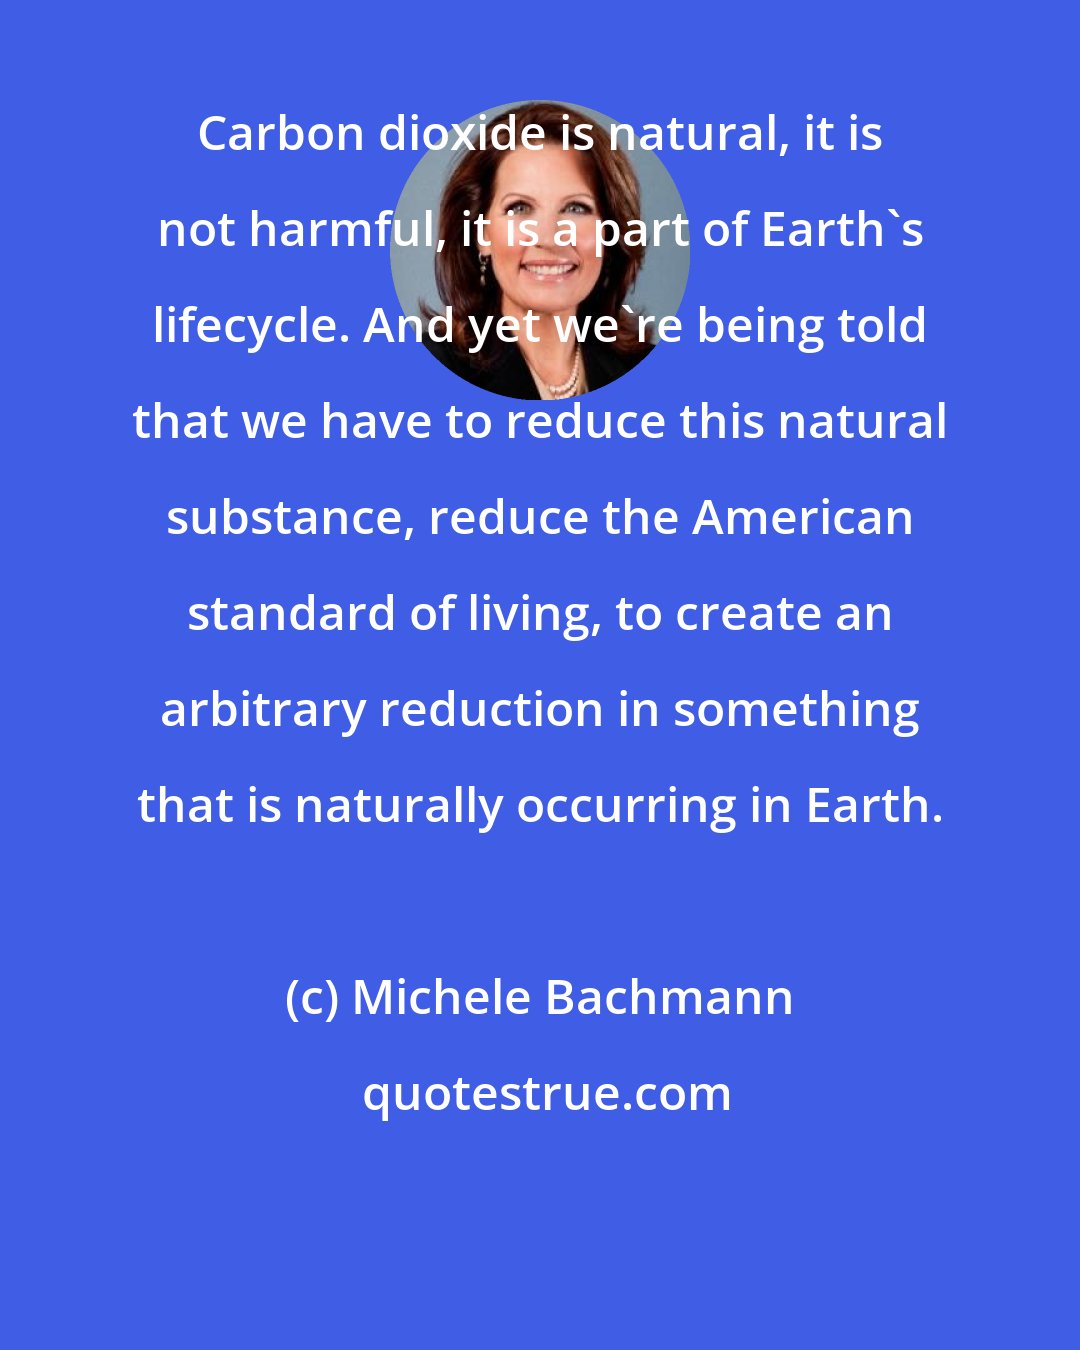 Michele Bachmann: Carbon dioxide is natural, it is not harmful, it is a part of Earth's lifecycle. And yet we're being told that we have to reduce this natural substance, reduce the American standard of living, to create an arbitrary reduction in something that is naturally occurring in Earth.